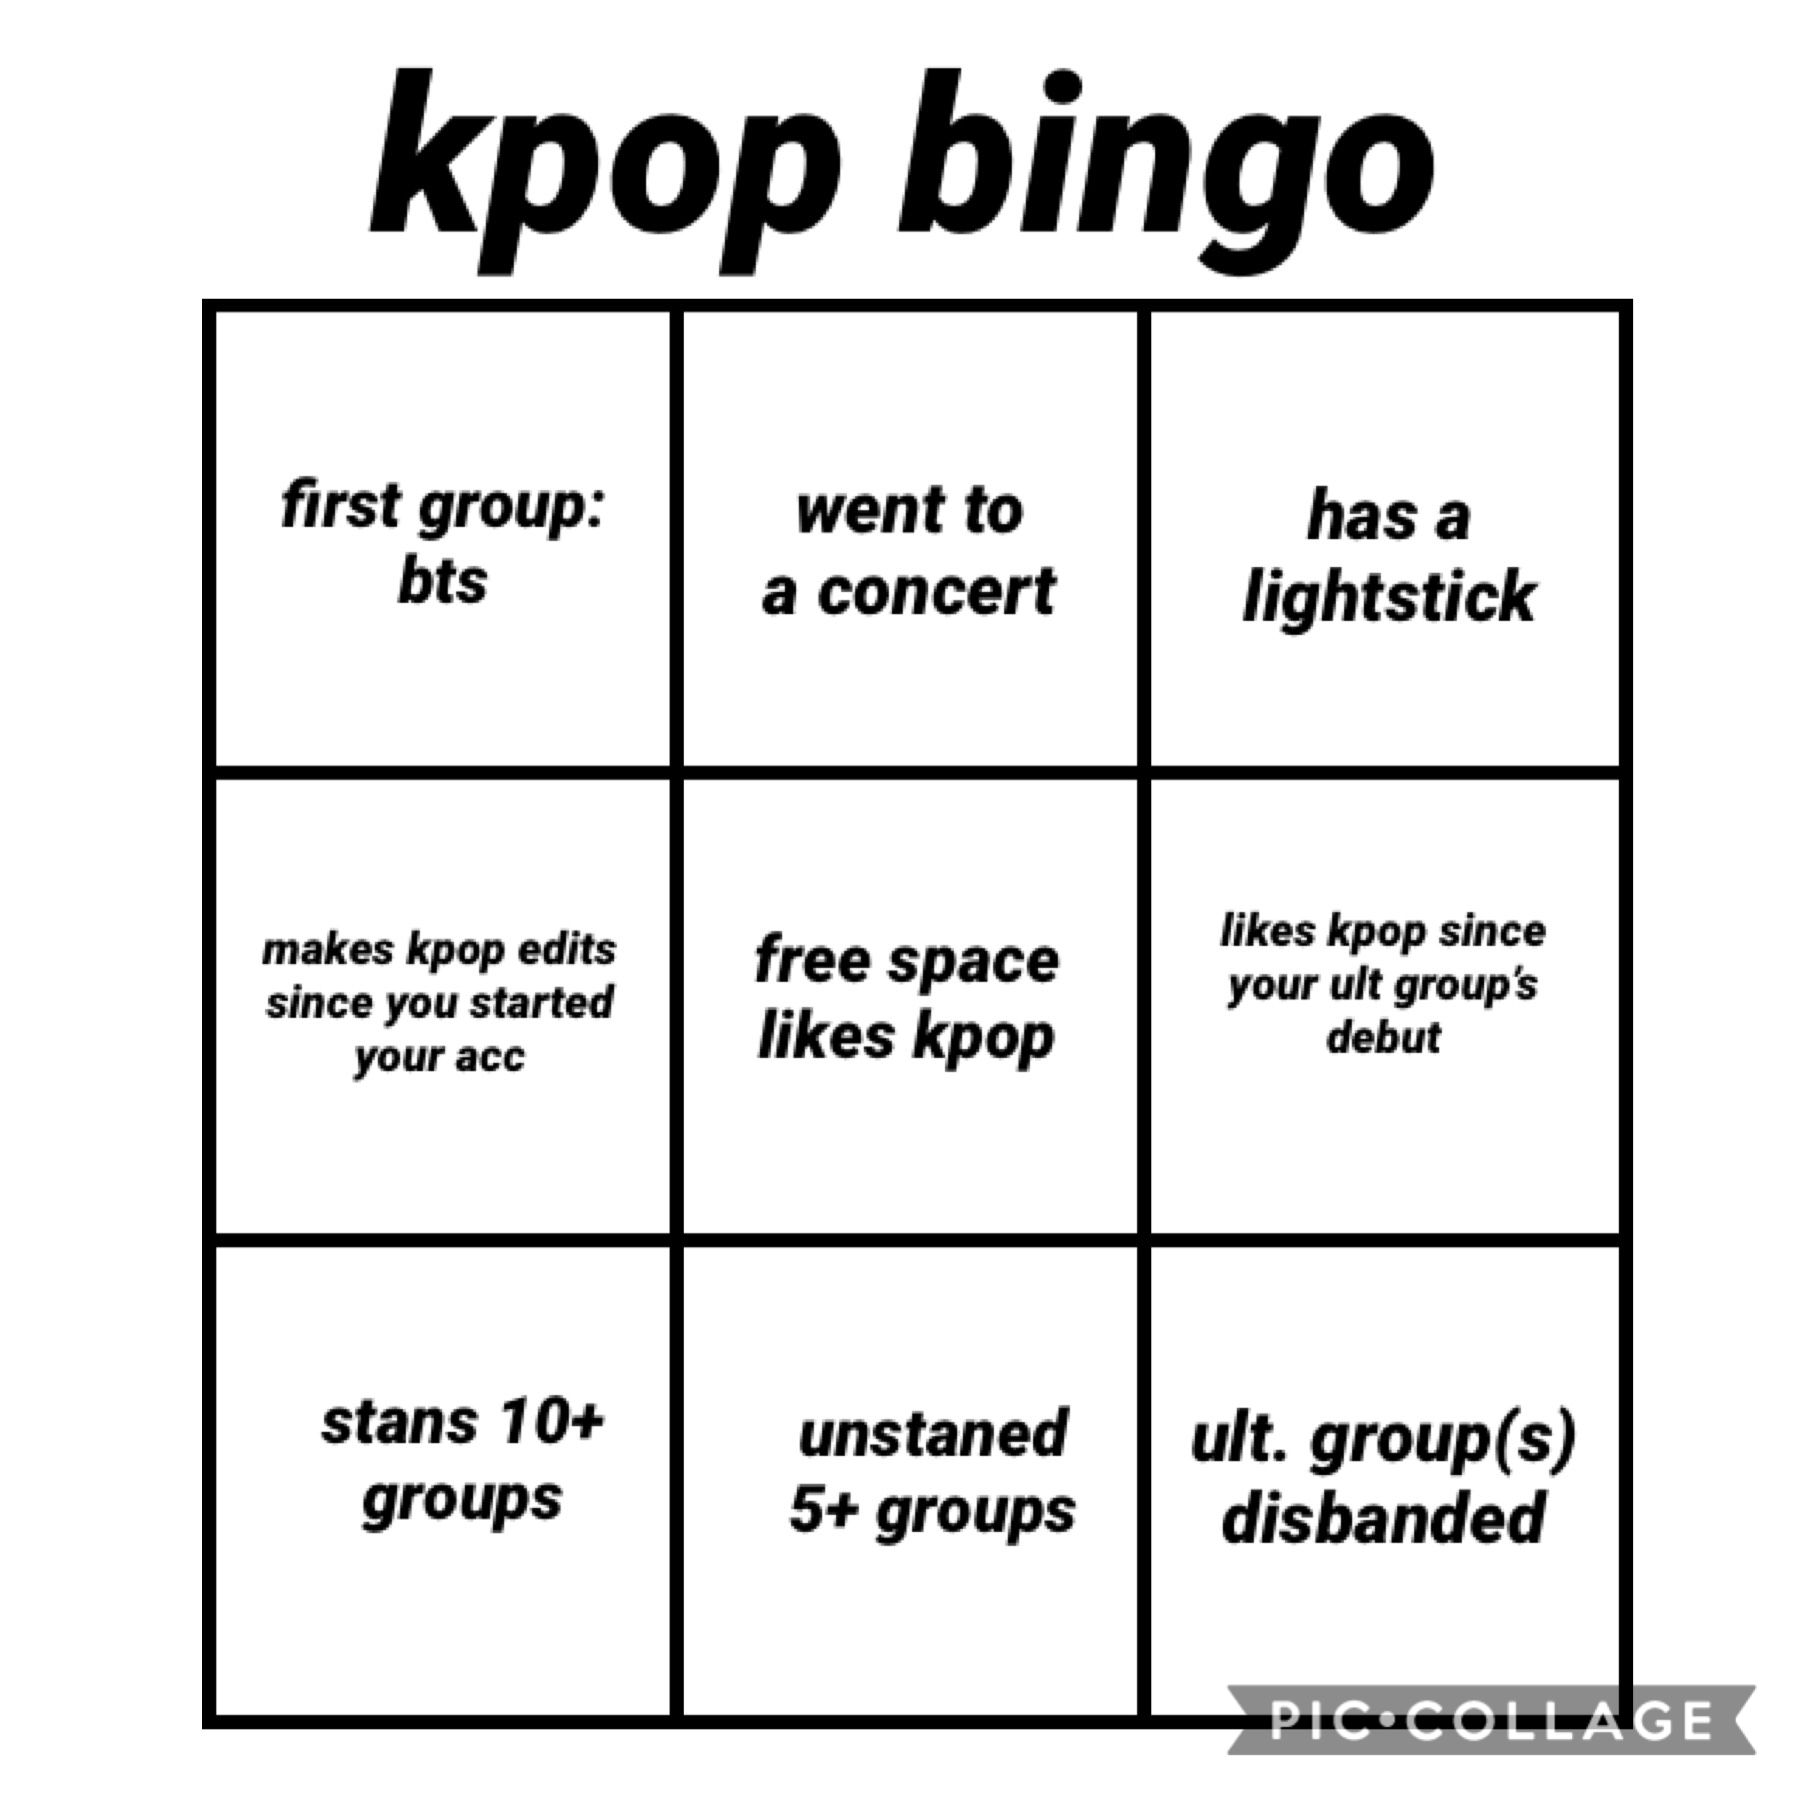 just a kPoP biNgO bc why not 🤠